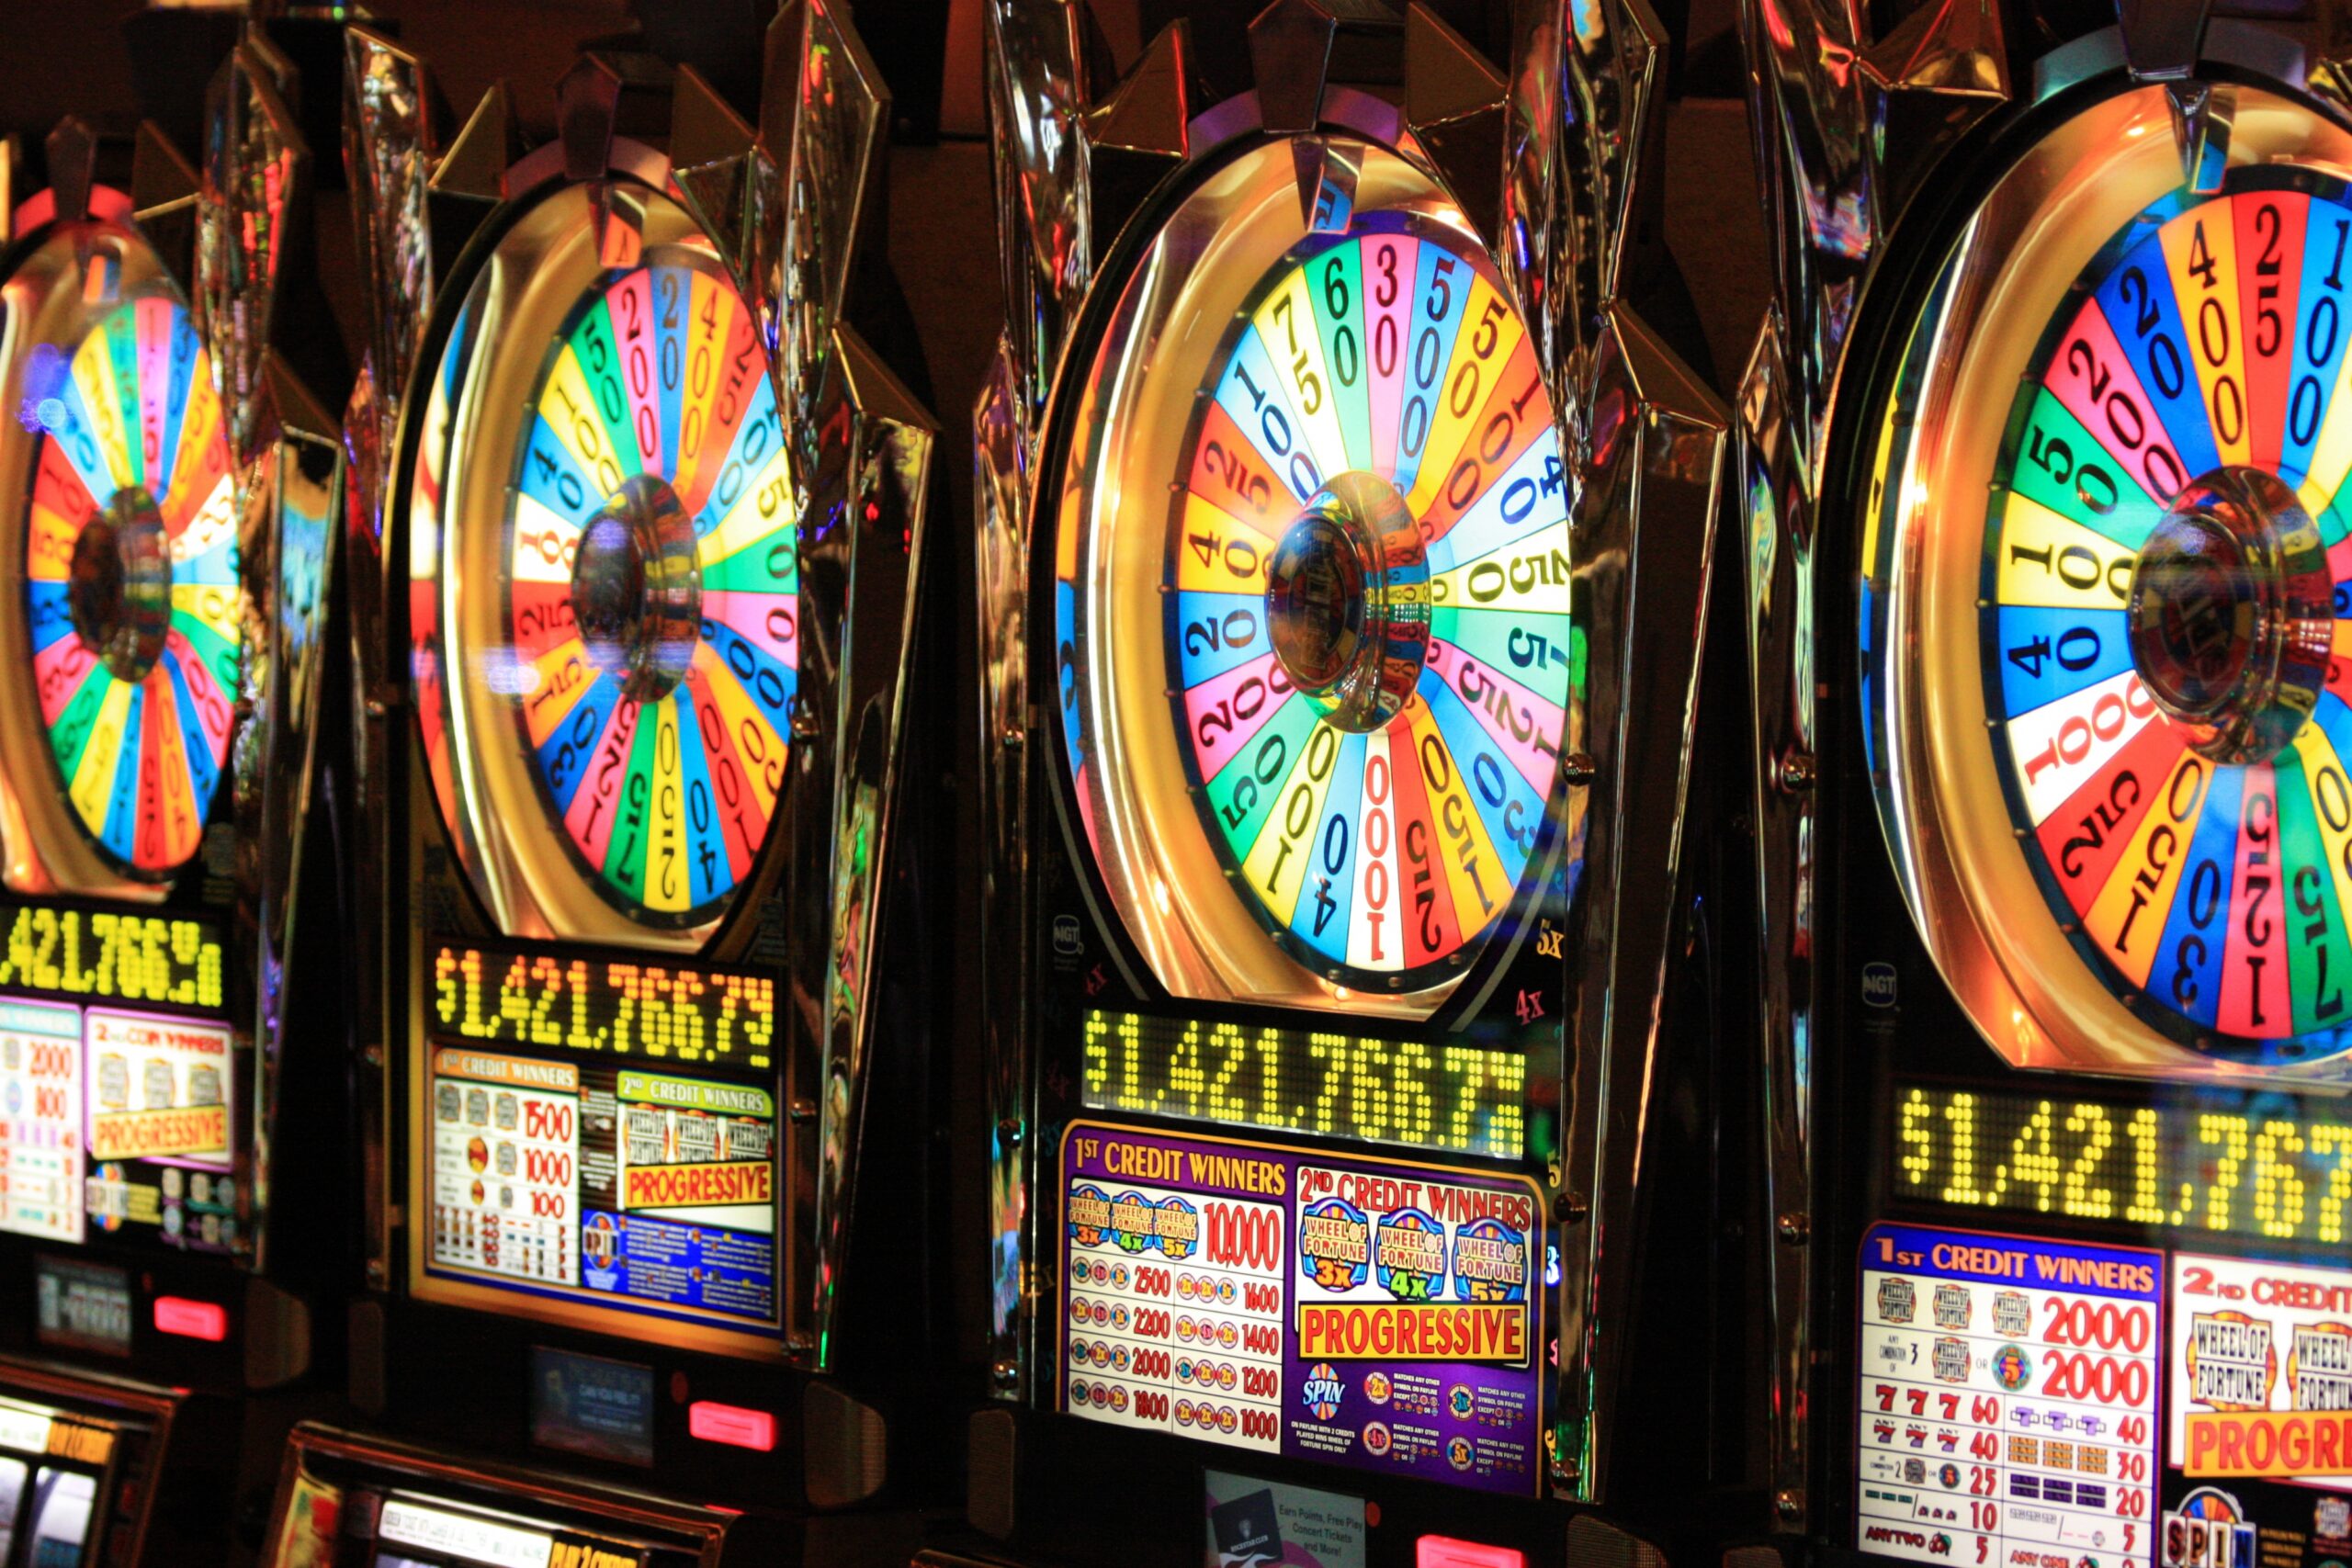 St. Croix Tribe Hit With $5.5M Fine For Misuse Of Gaming Revenues